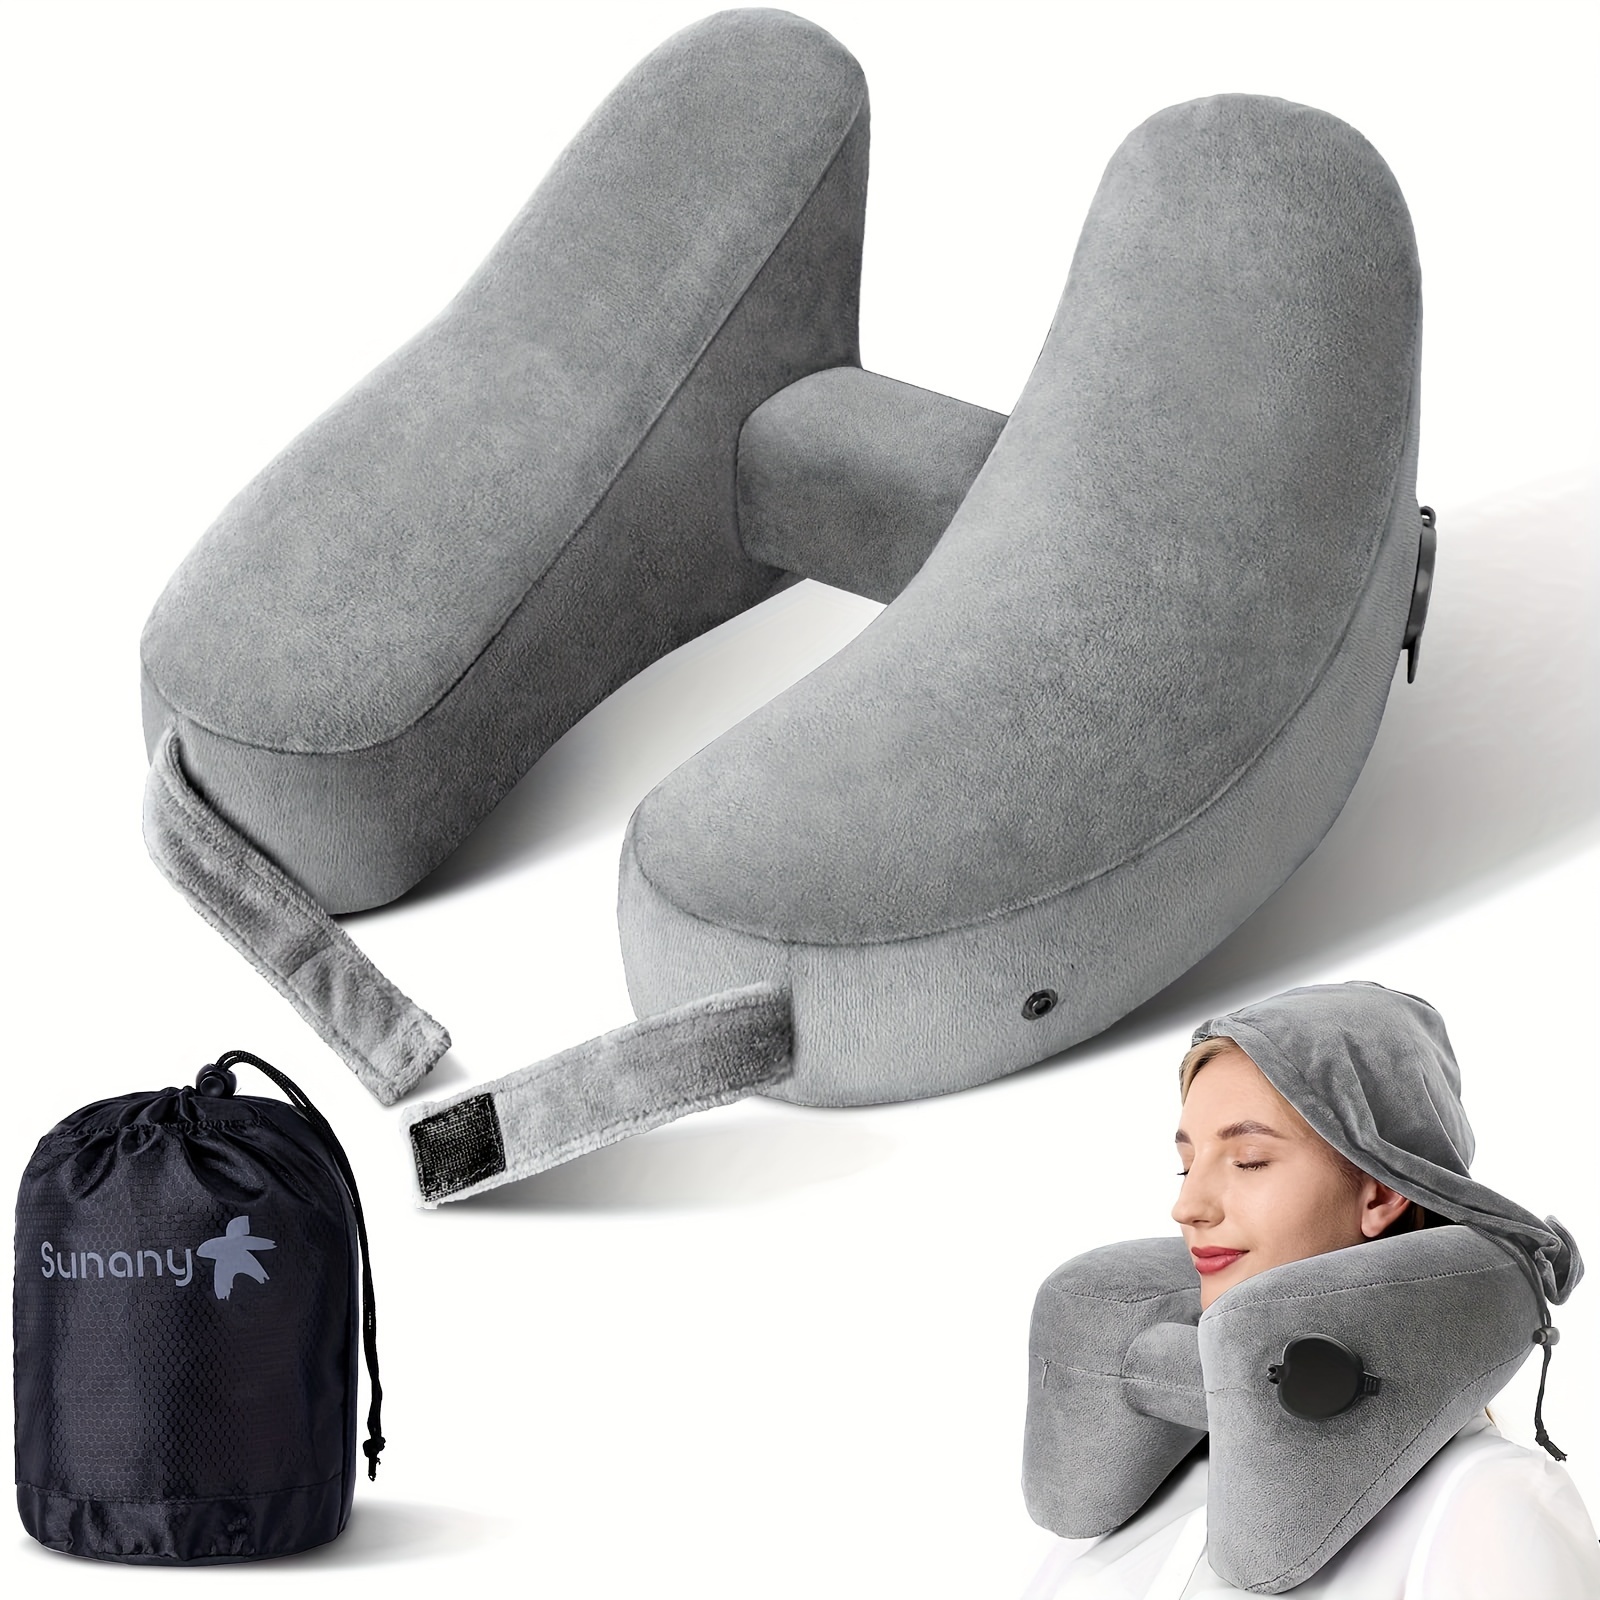 

Inflatable Neck Pillow For Airplane Travel, Comfortably Supports Head, Neck And Chin, Inflatable Travel Pillow With Soft Velour Cover And Portable Drawstring Bag